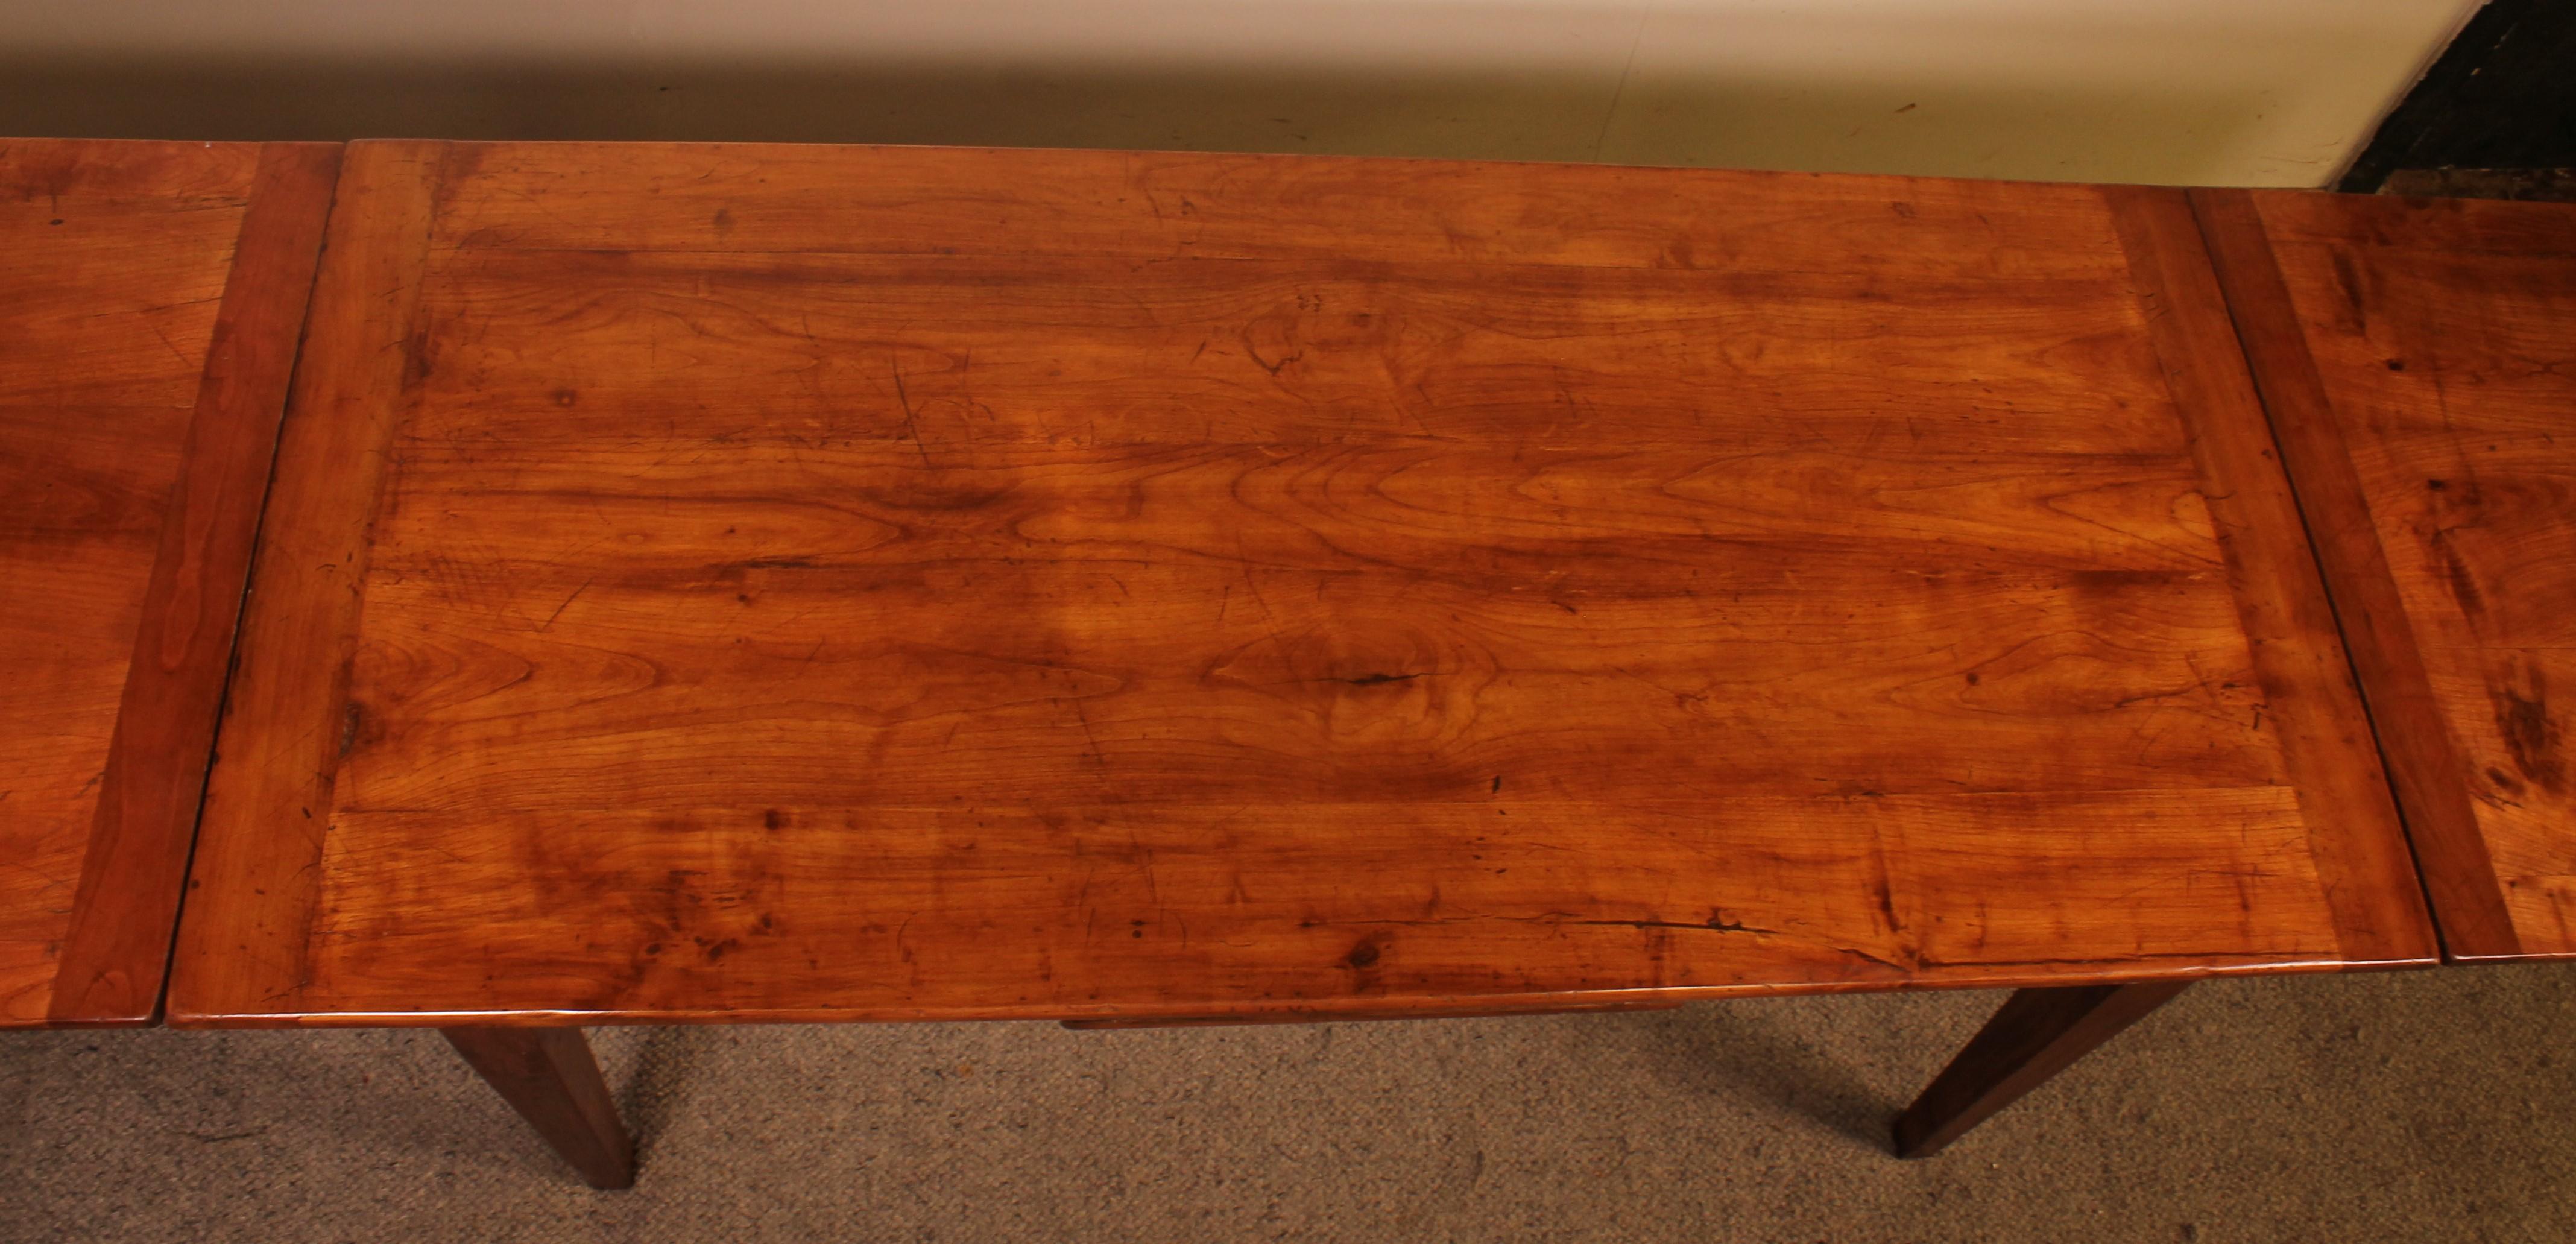 Small Extendable Table in Cherry Wood from the 19th Century For Sale 2